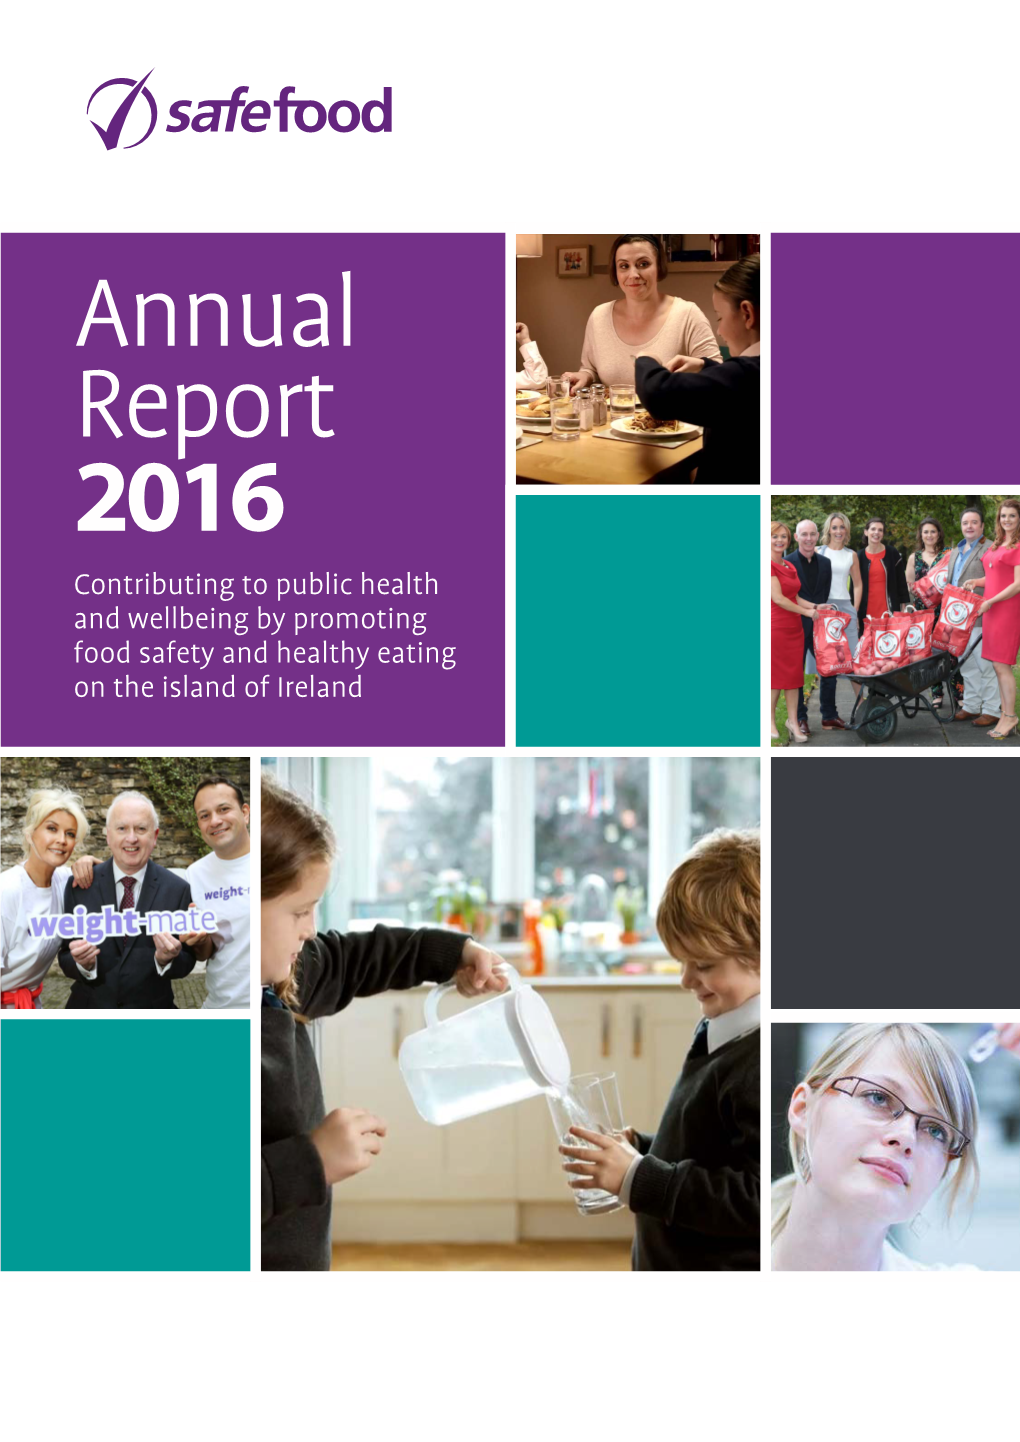 Annual Report 2016 Contributing to Public Health and Wellbeing by Promoting Food Safety and Healthy Eating on the Island of Ireland 2